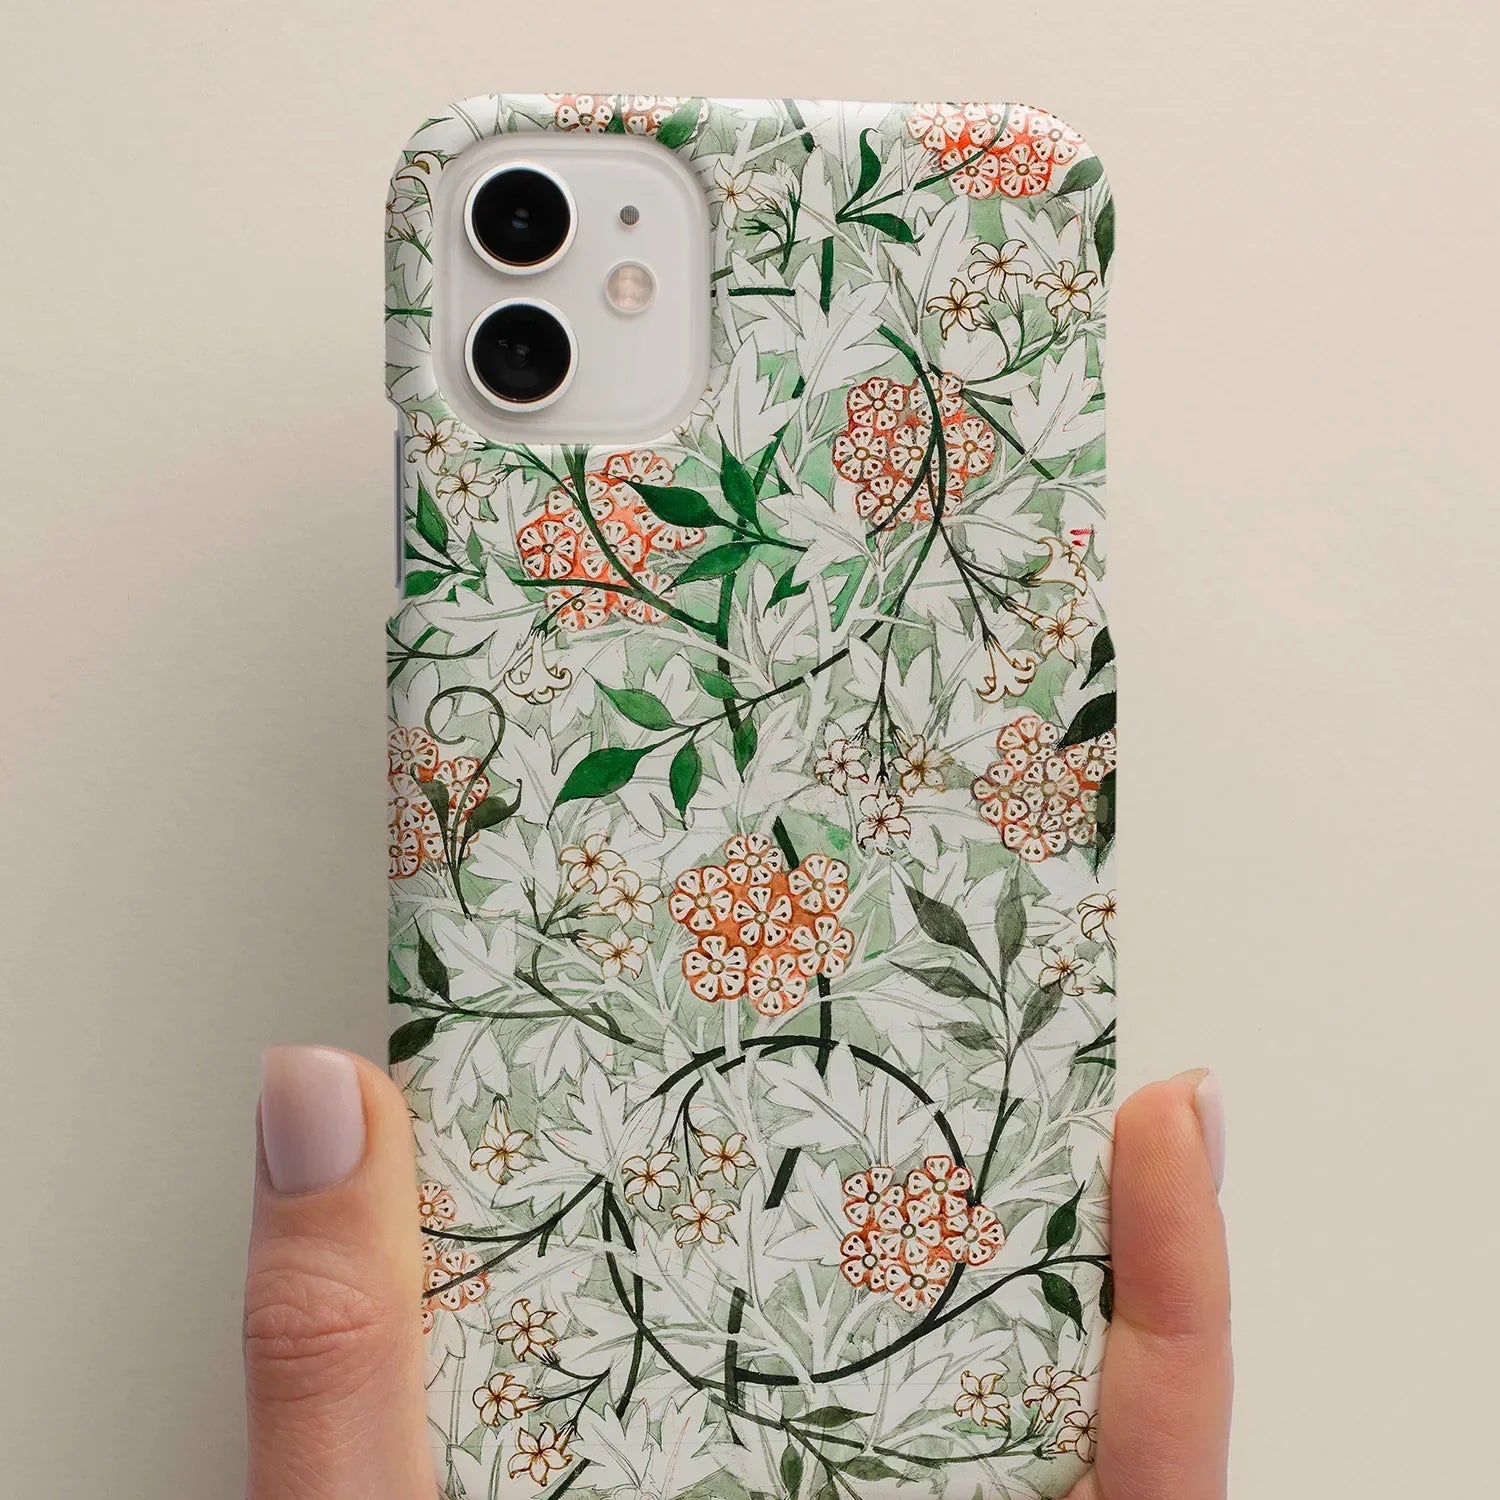 10 William Morris Phone Cases for Arts and Crafts Nerds